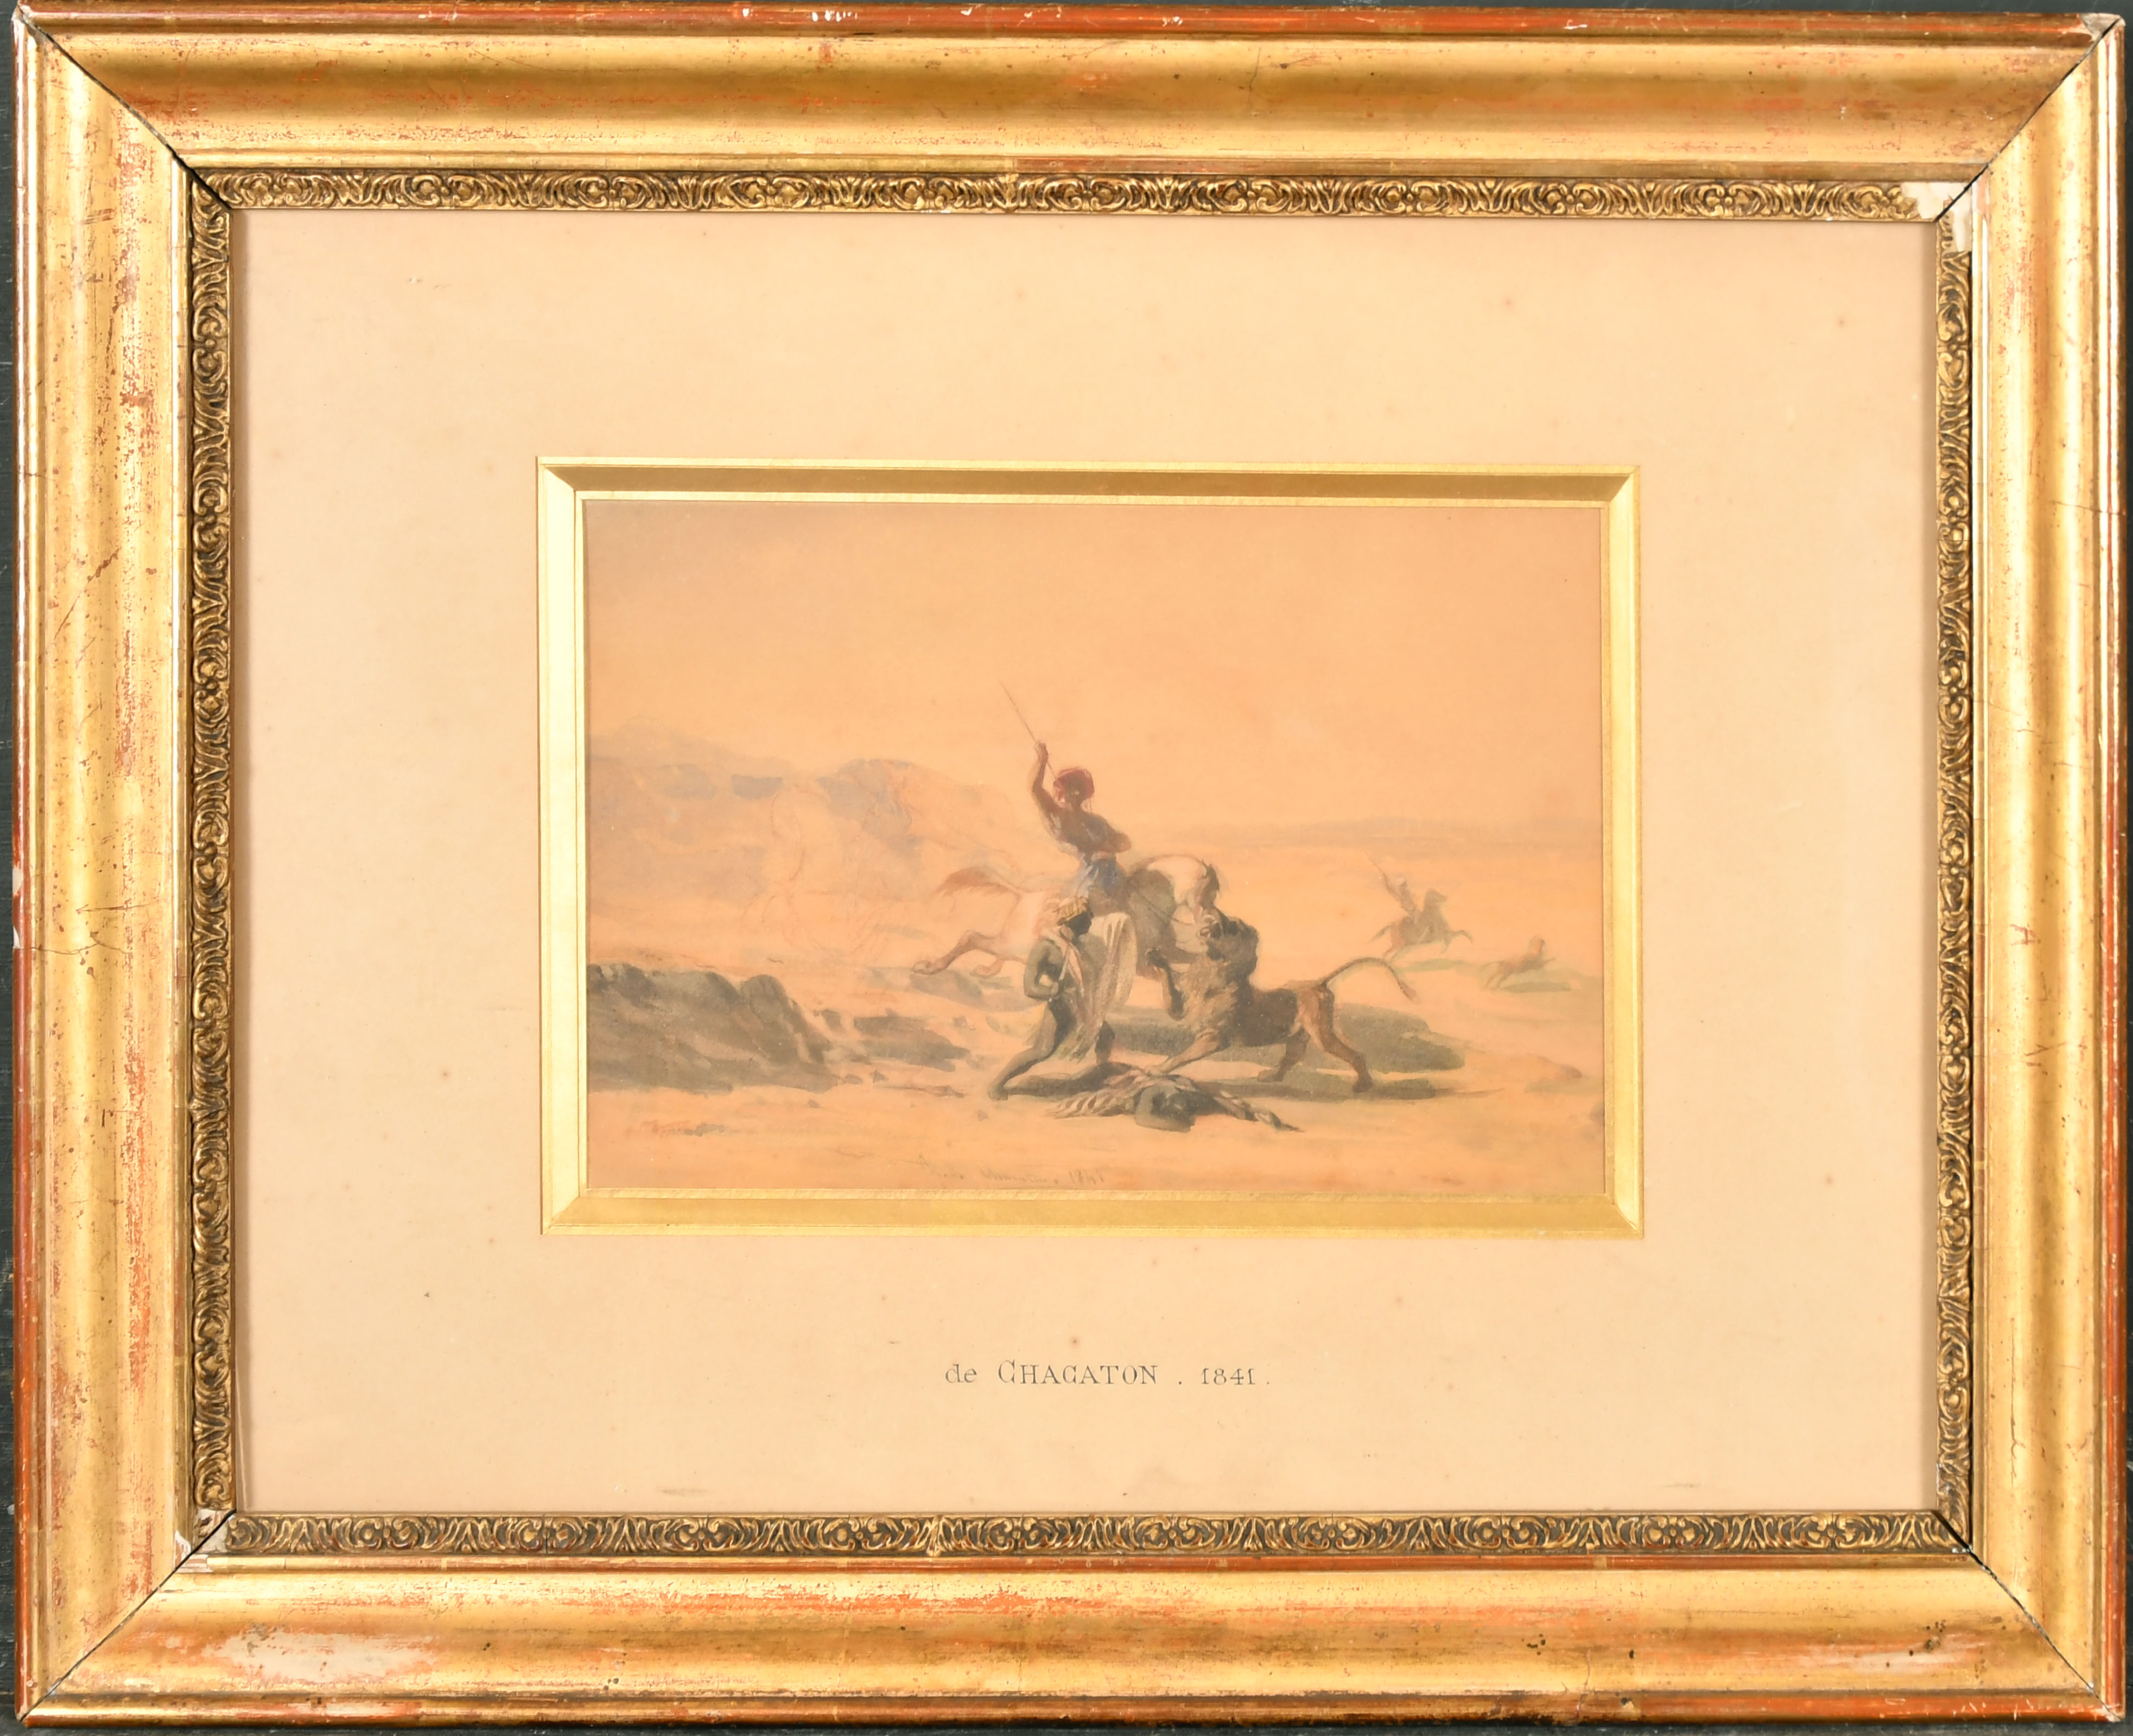 Henri de Chacaton (1813-1886) French. 'The Lion Hunt', Watercolour, Signed and dated 1841, 5.5" x - Image 2 of 4